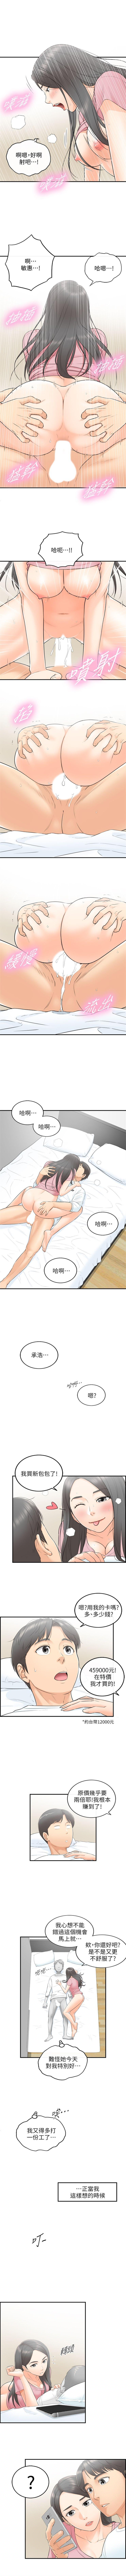 Pussy Sex 正妹小主管 1-68 官方中文（連載中） Male - Page 7